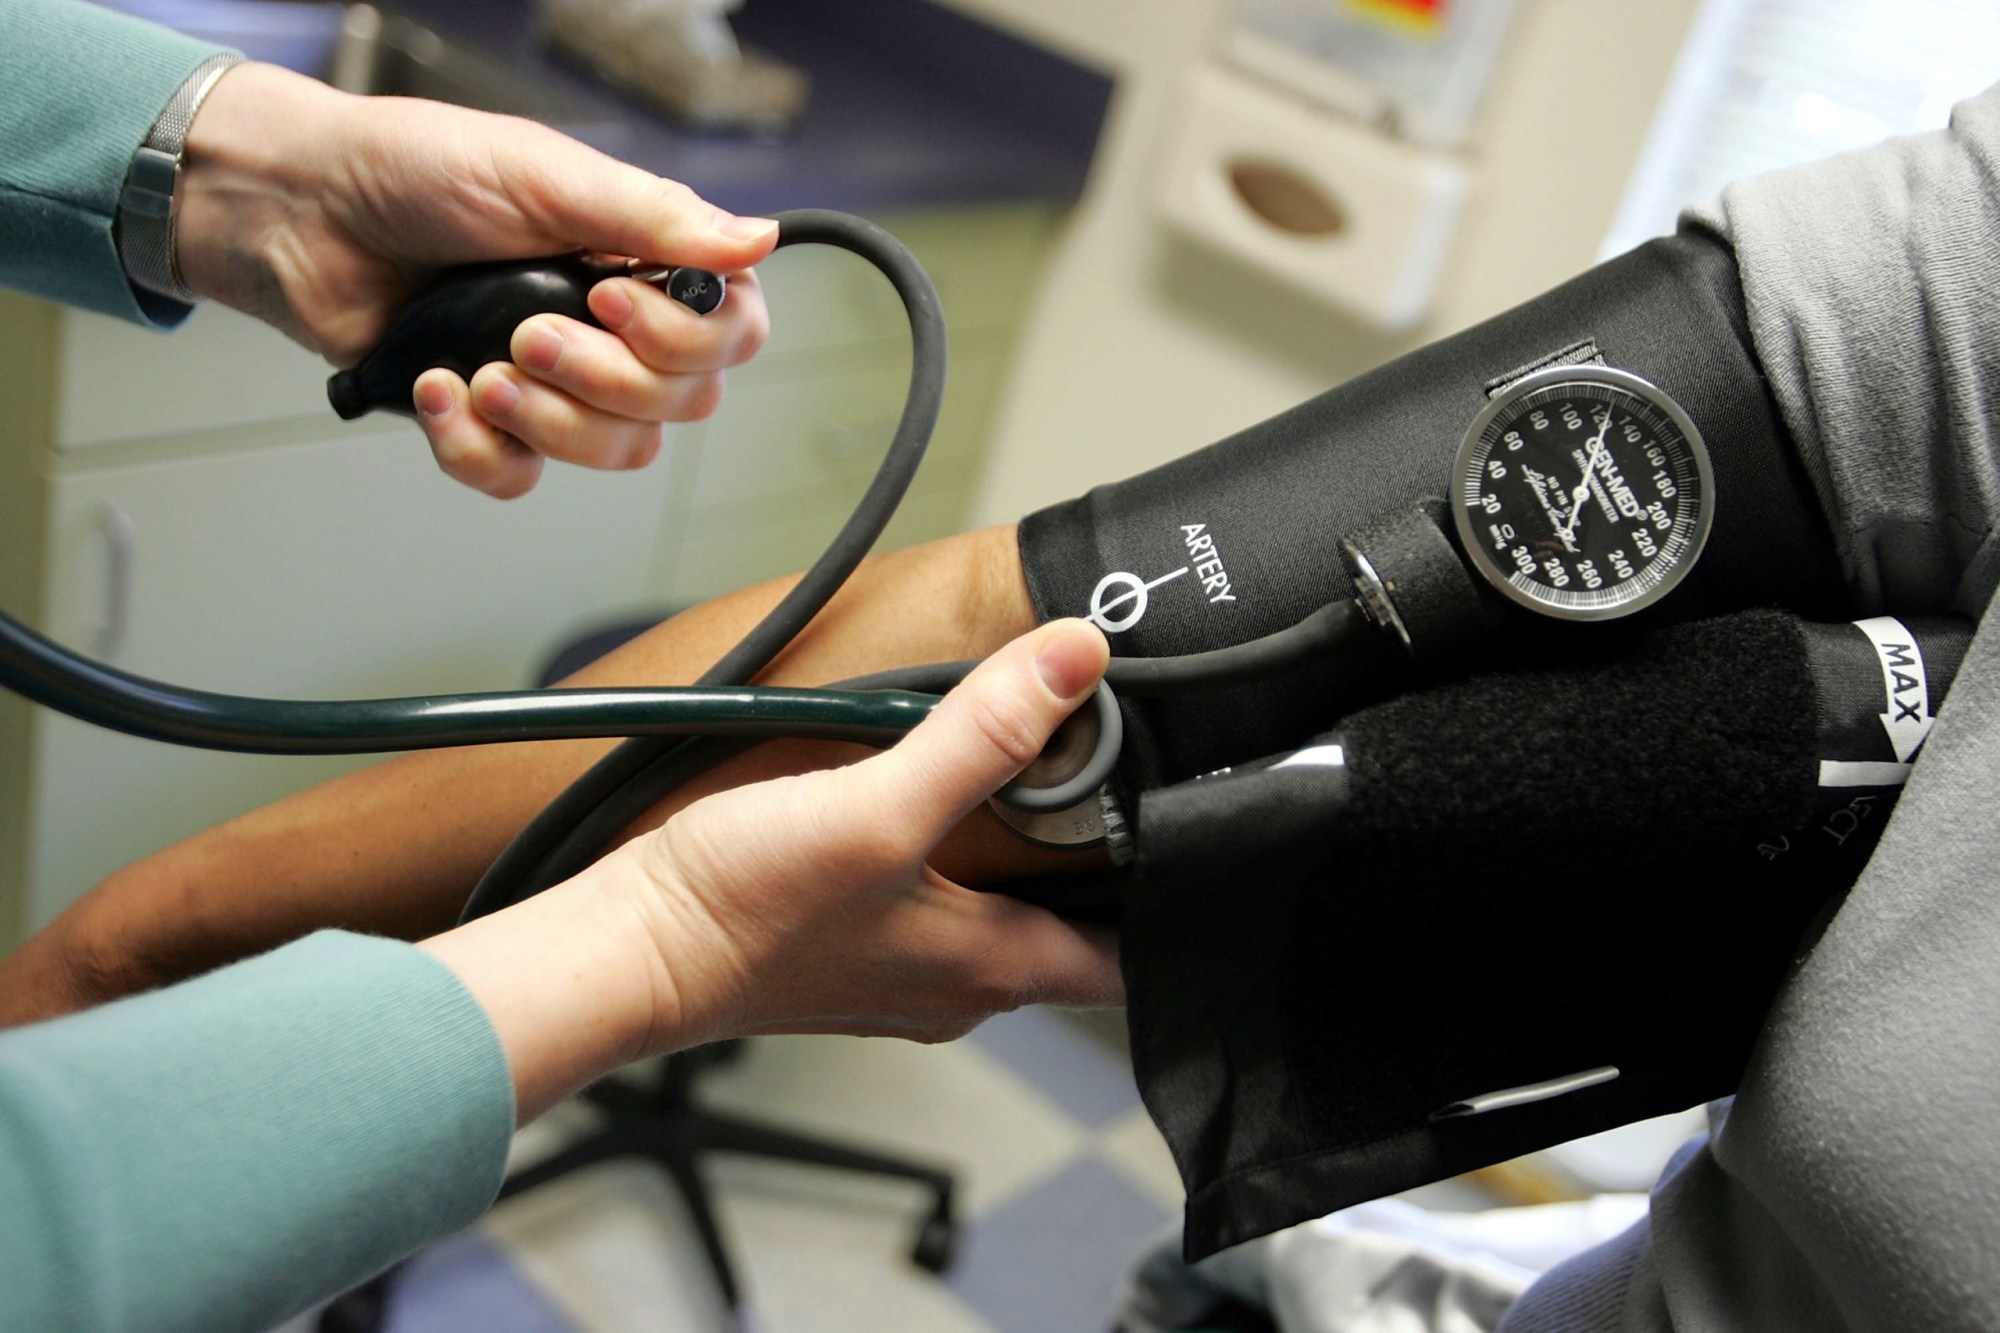 Dr. Elizabeth Maziarka reads a blood pressure gauge during an examination of patient June Mendez at the Codman Square Health Center in Dorchester, Massachusetts on April 11, 2006. (Getty/Joe Raedle)